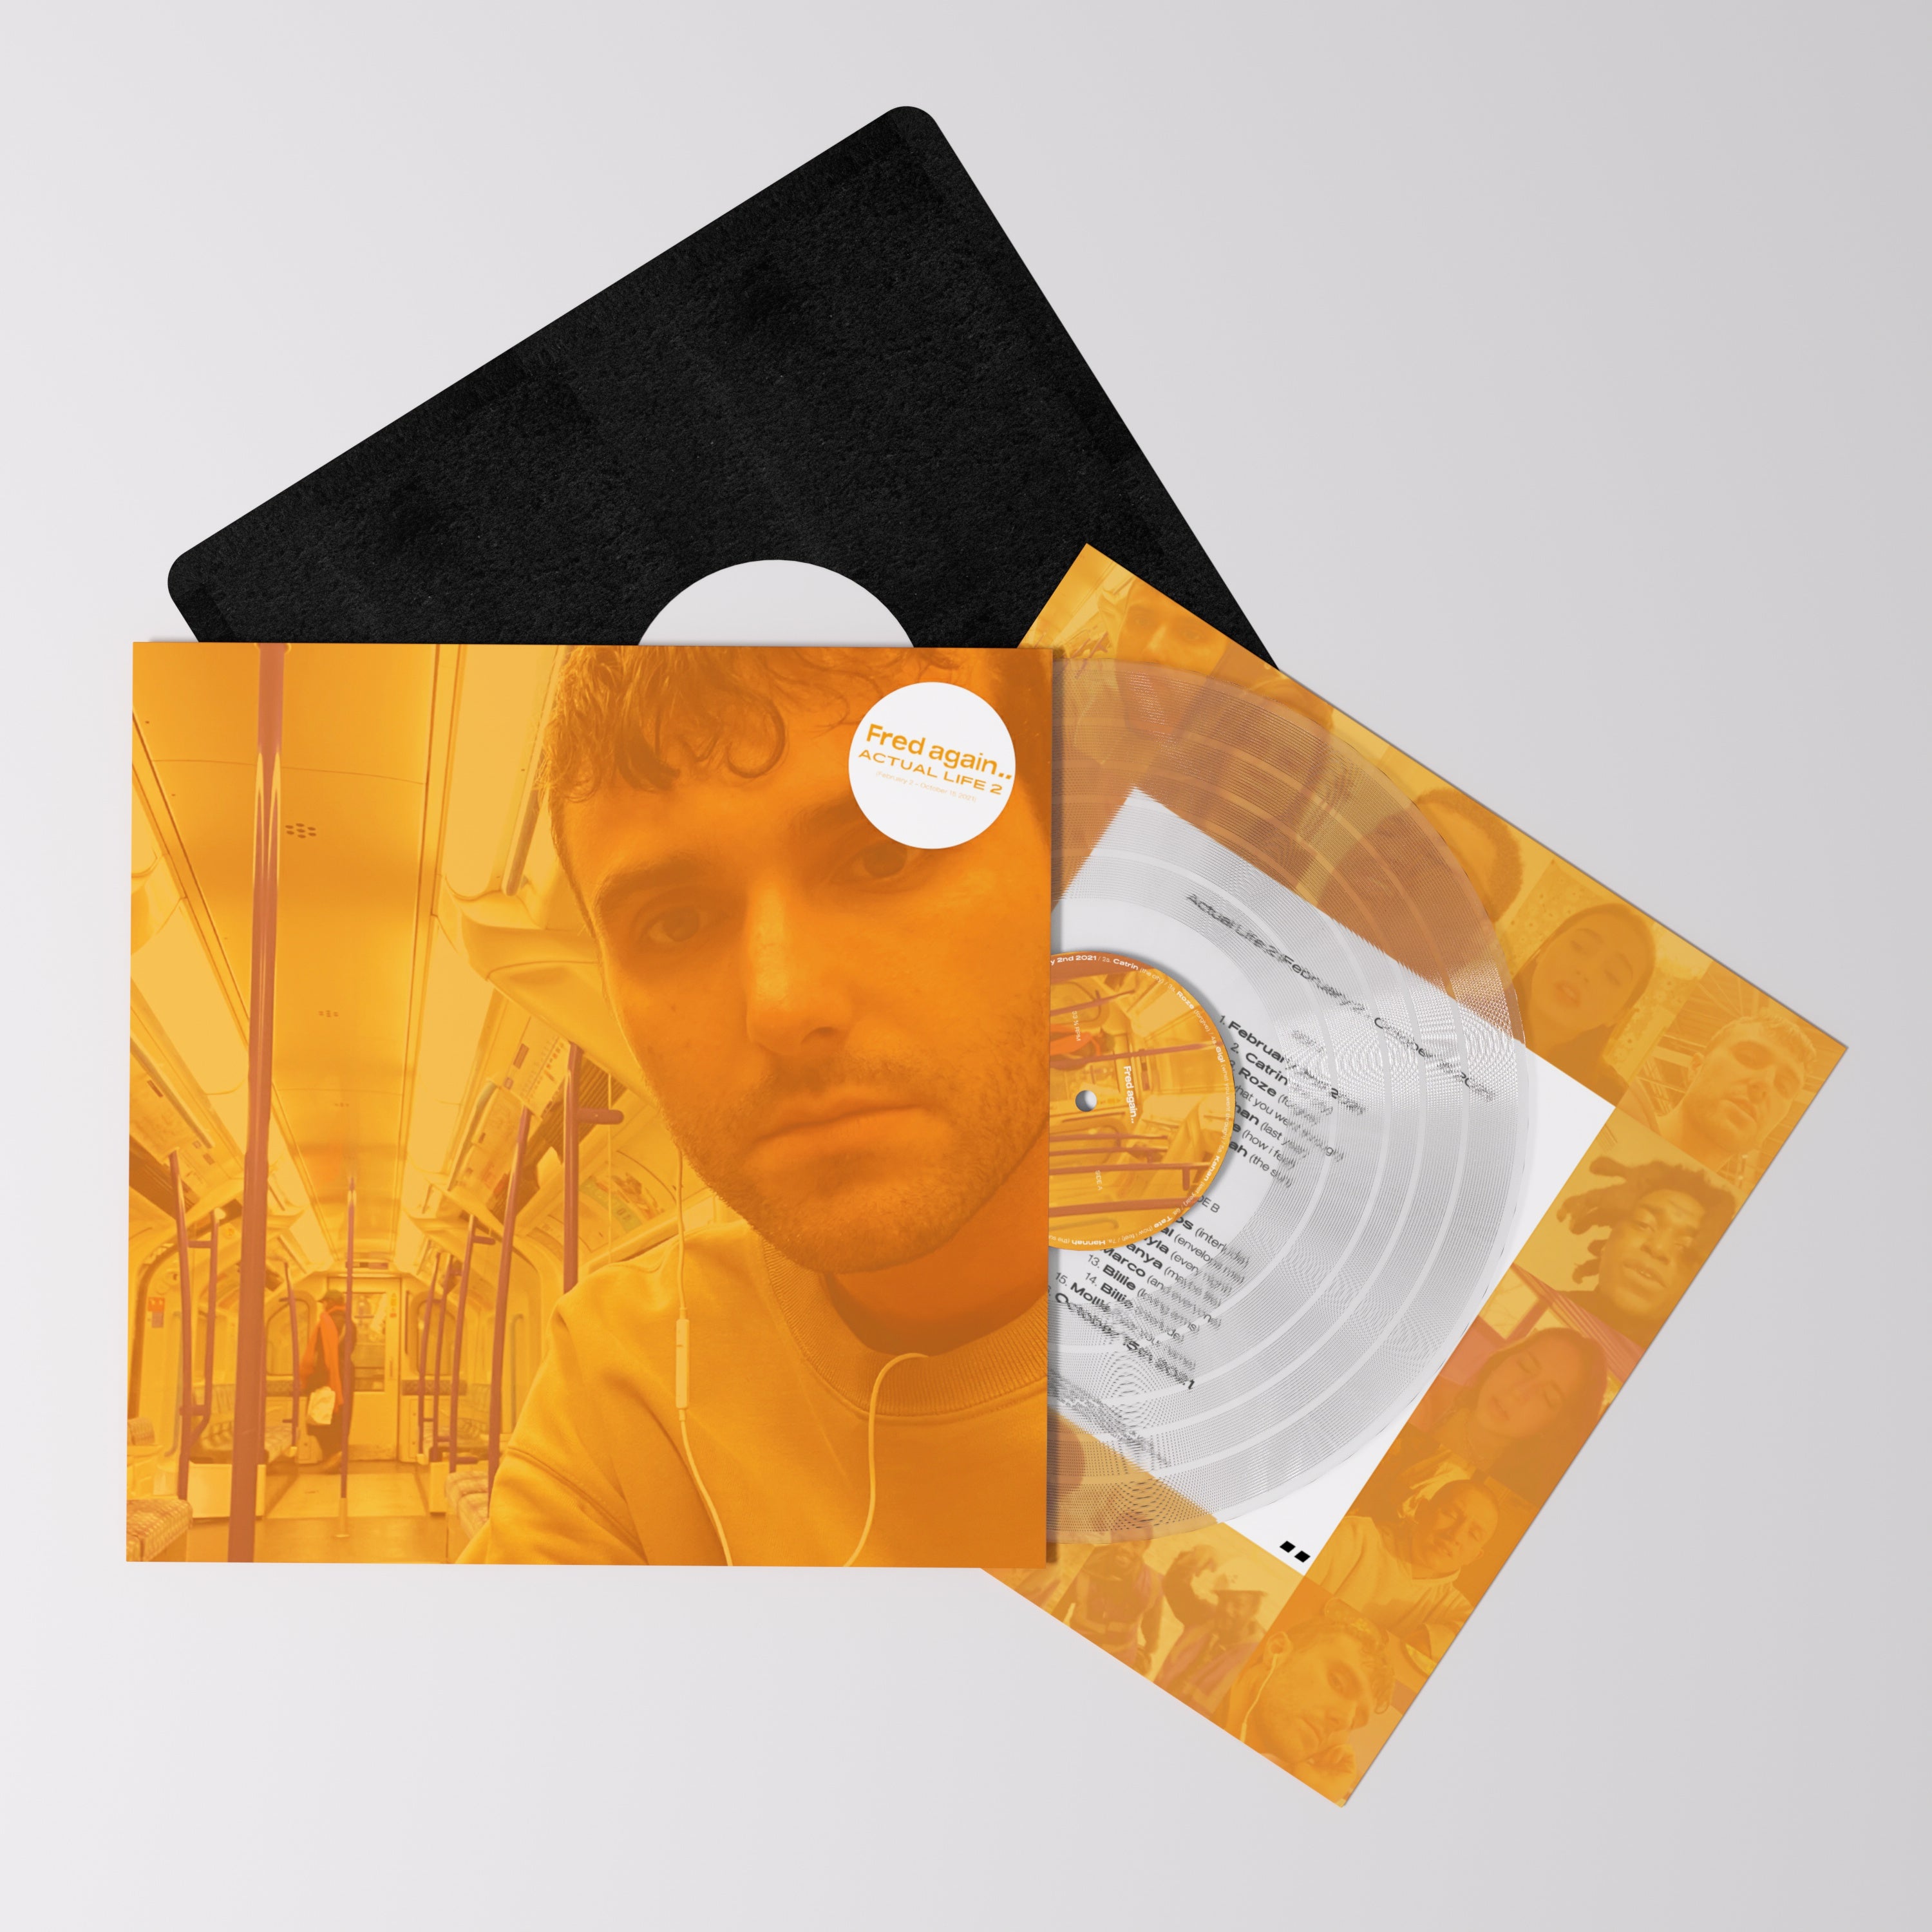 Fred again.. - Actual Life 2 (February 2 - October 15 2021): Limited Edition Clear Vinyl LP